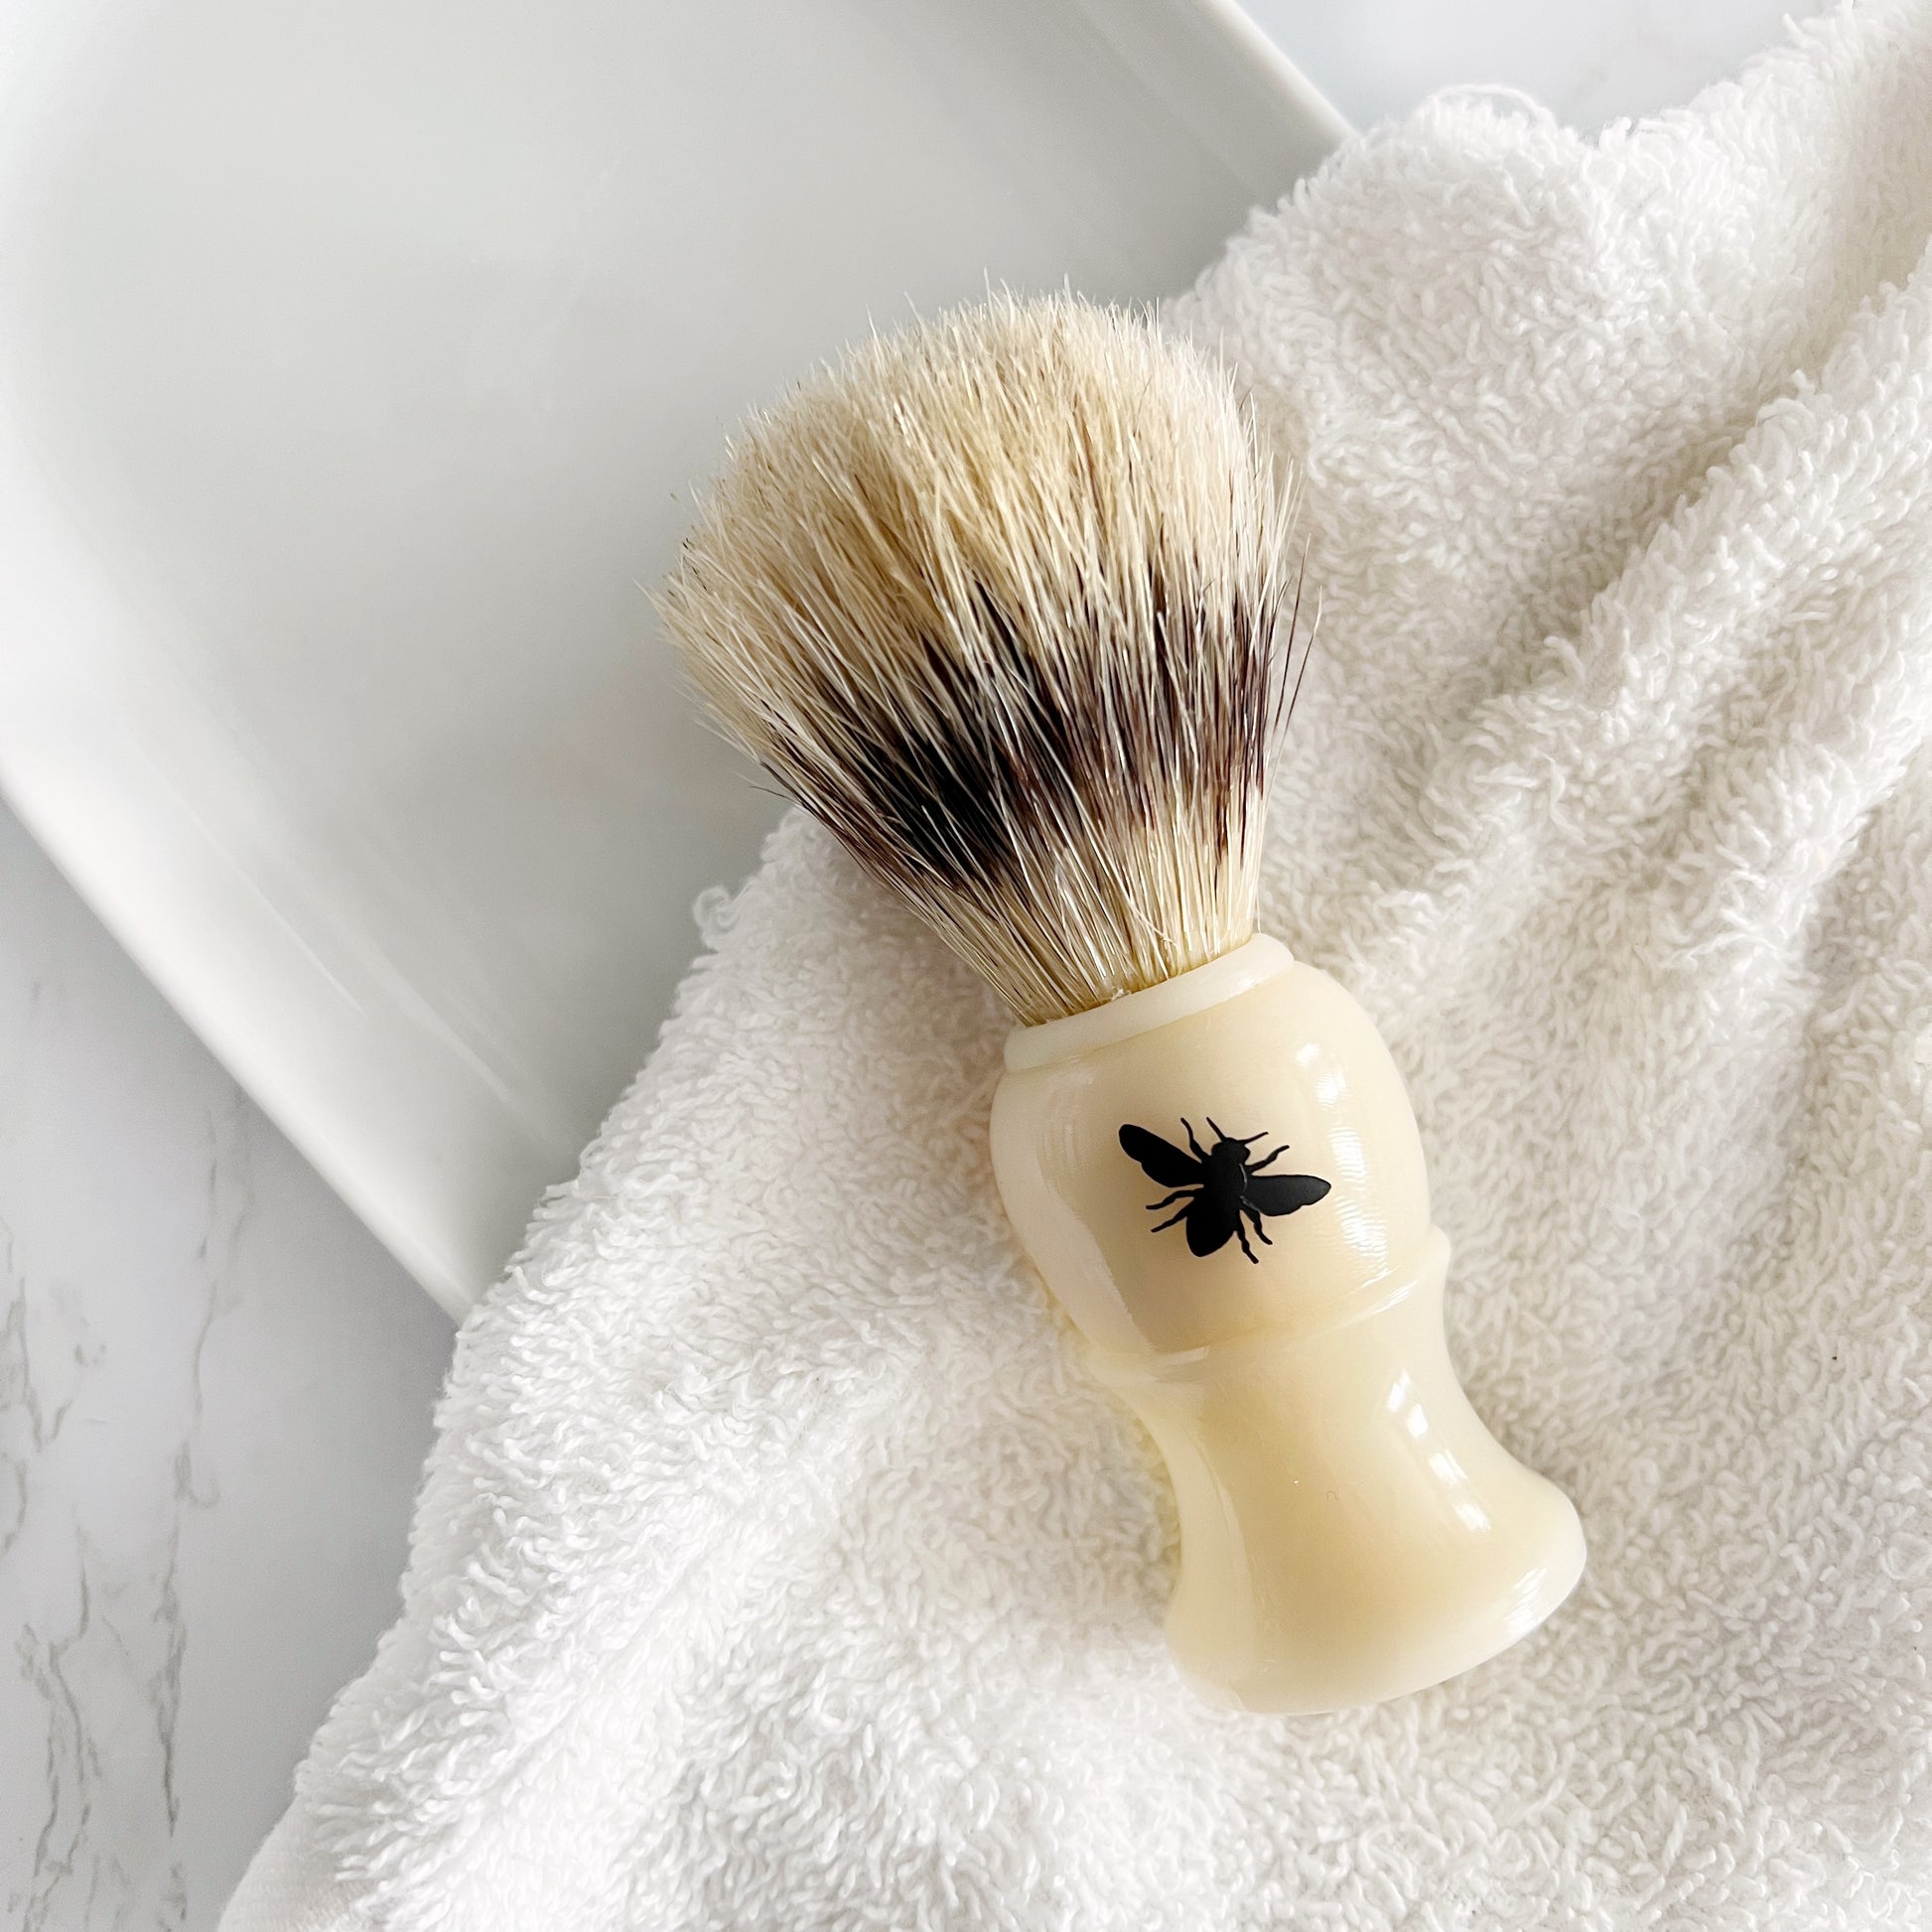 Shaving brush from Lather and Soul